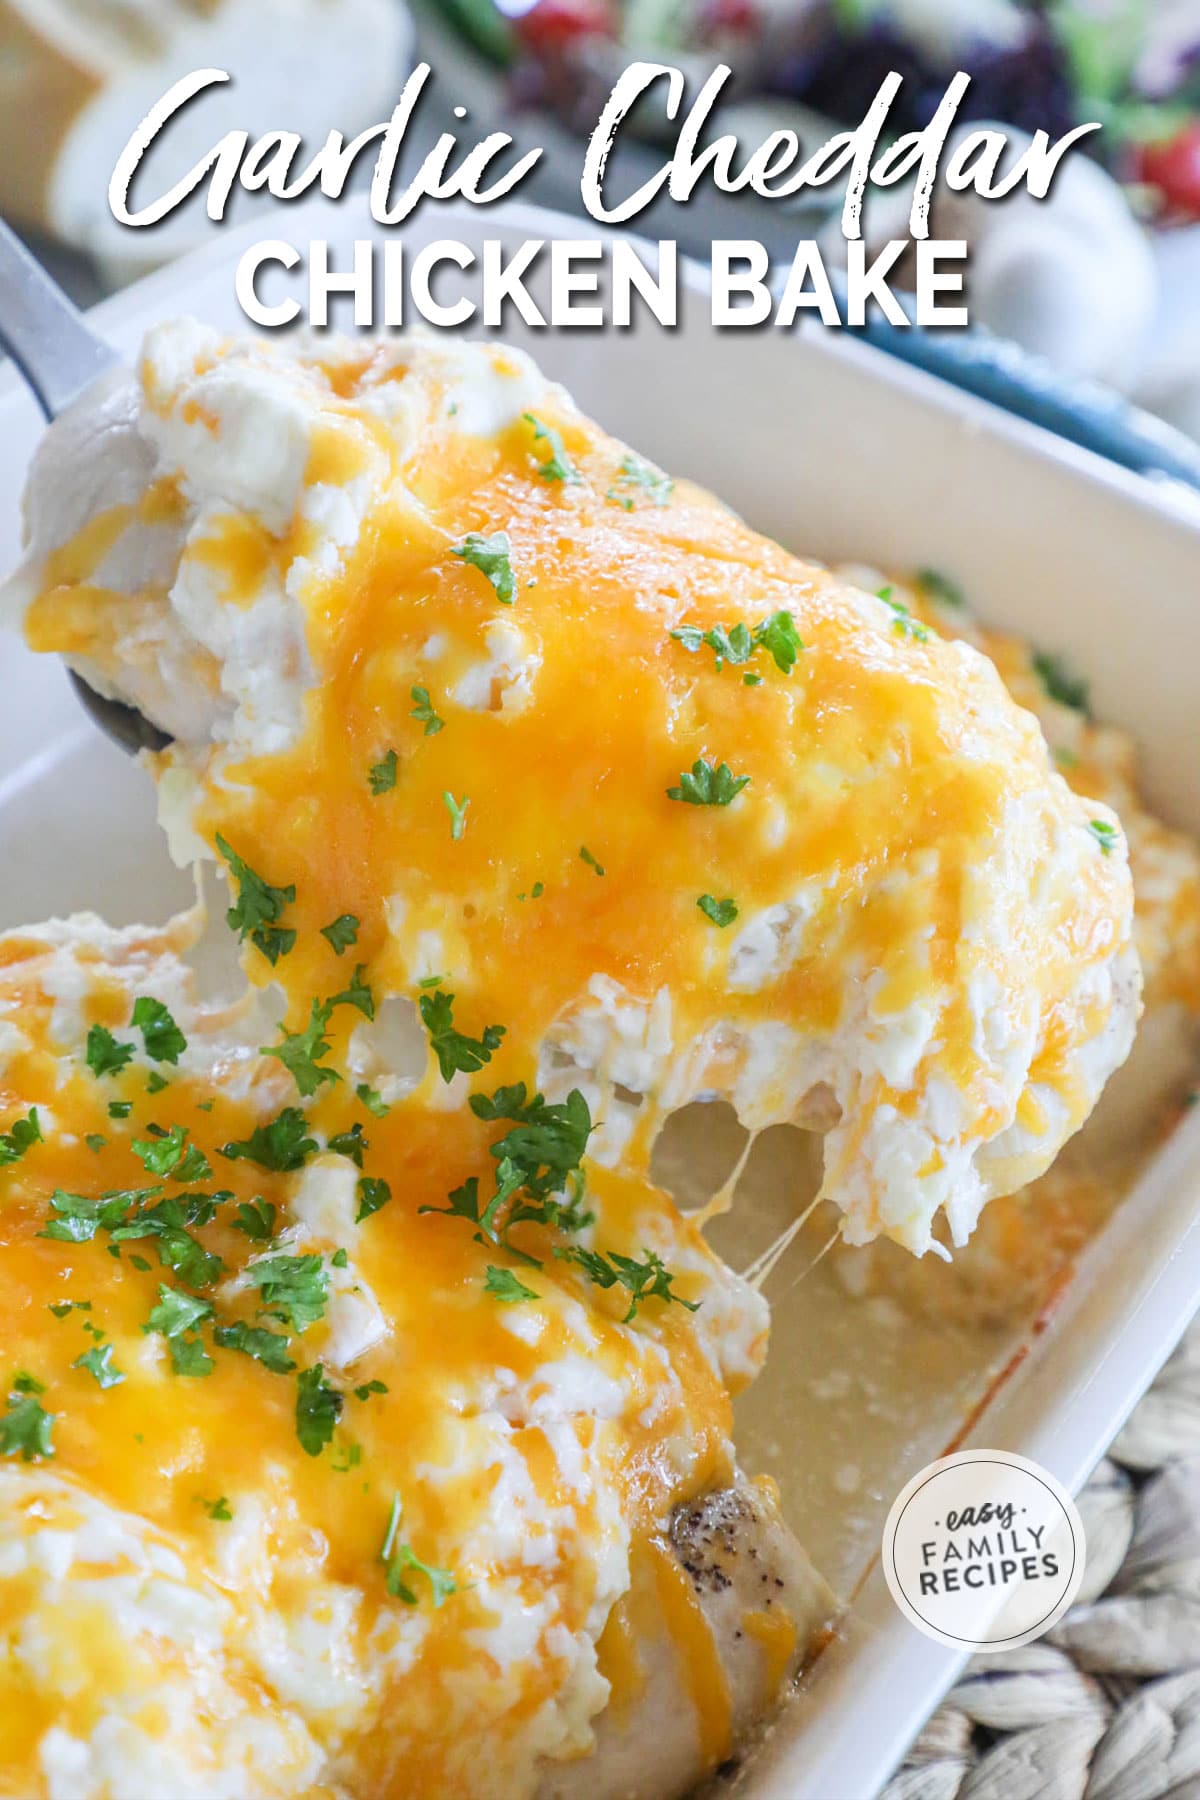 A juicy baked chicken breast with a creamy garlic cheddar cheese topping